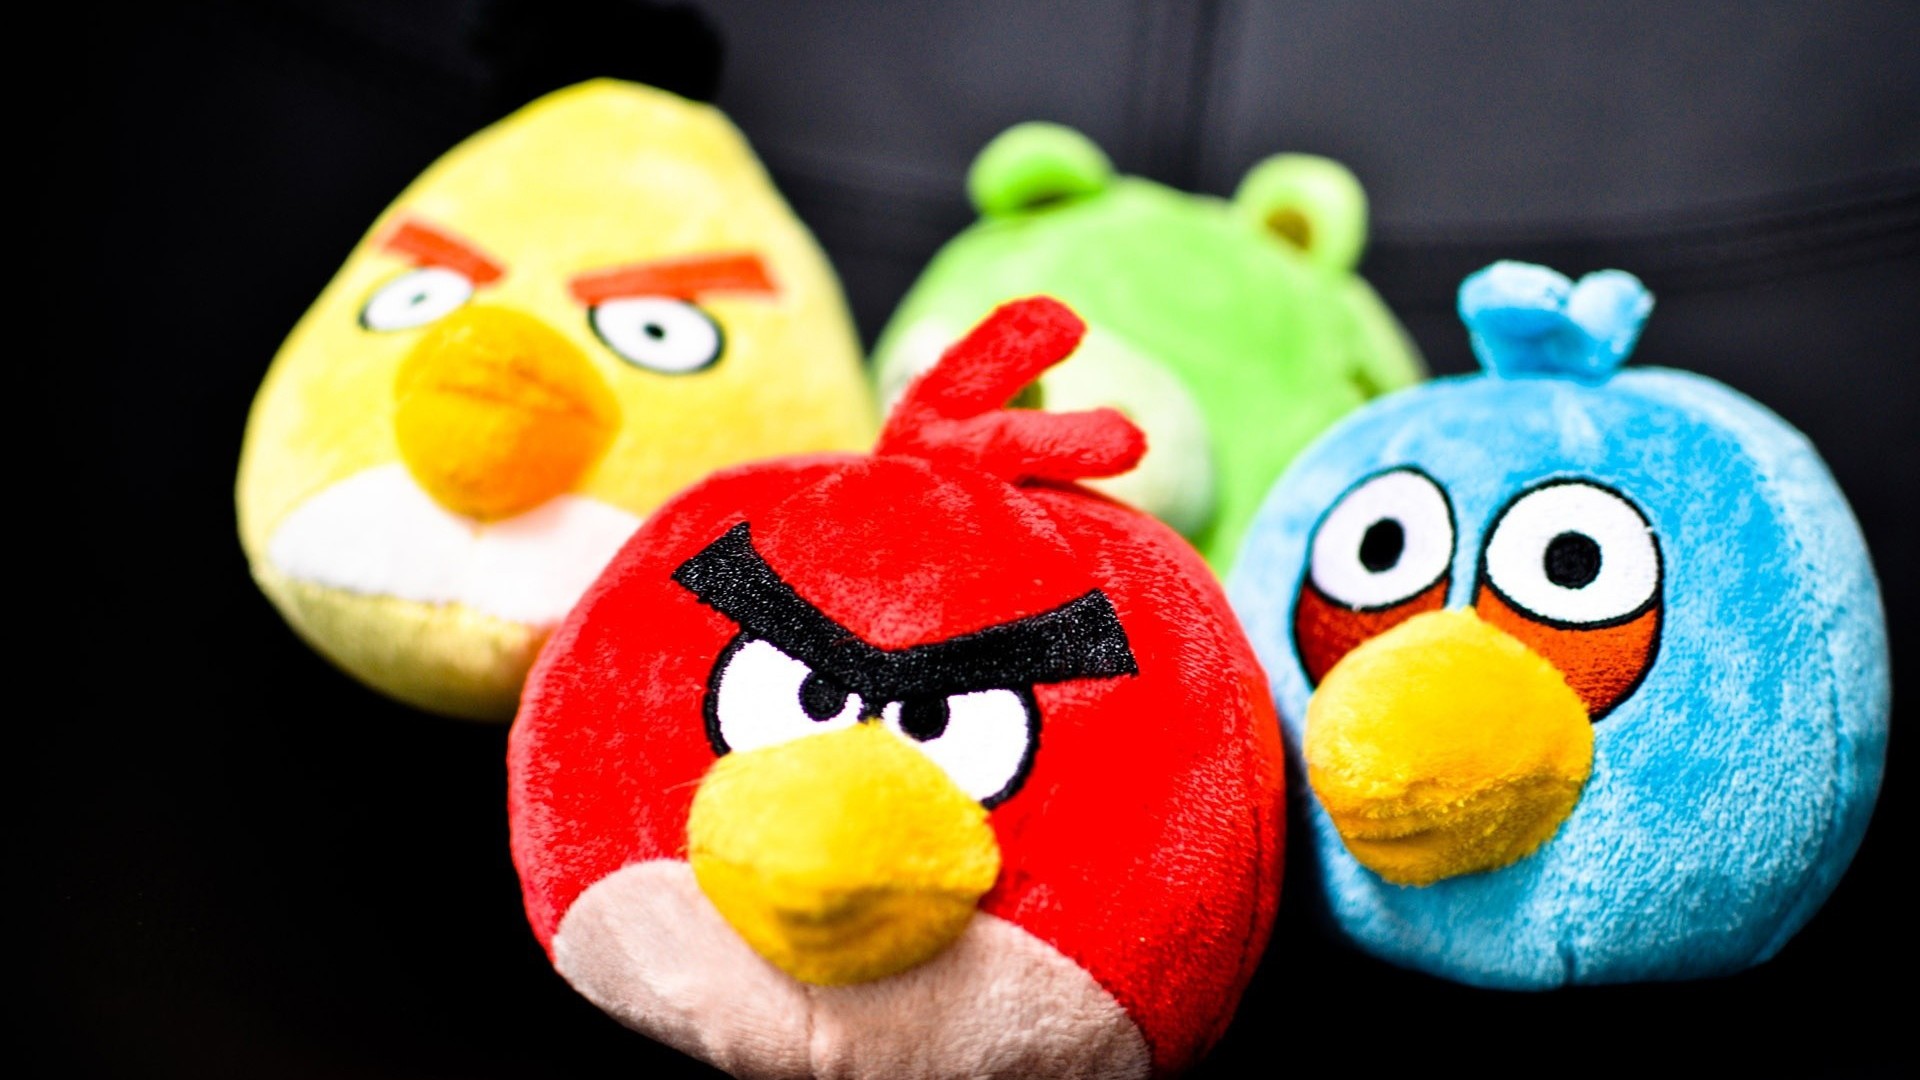 plush wallpaper,angry birds,toy,stuffed toy,video game software,plush